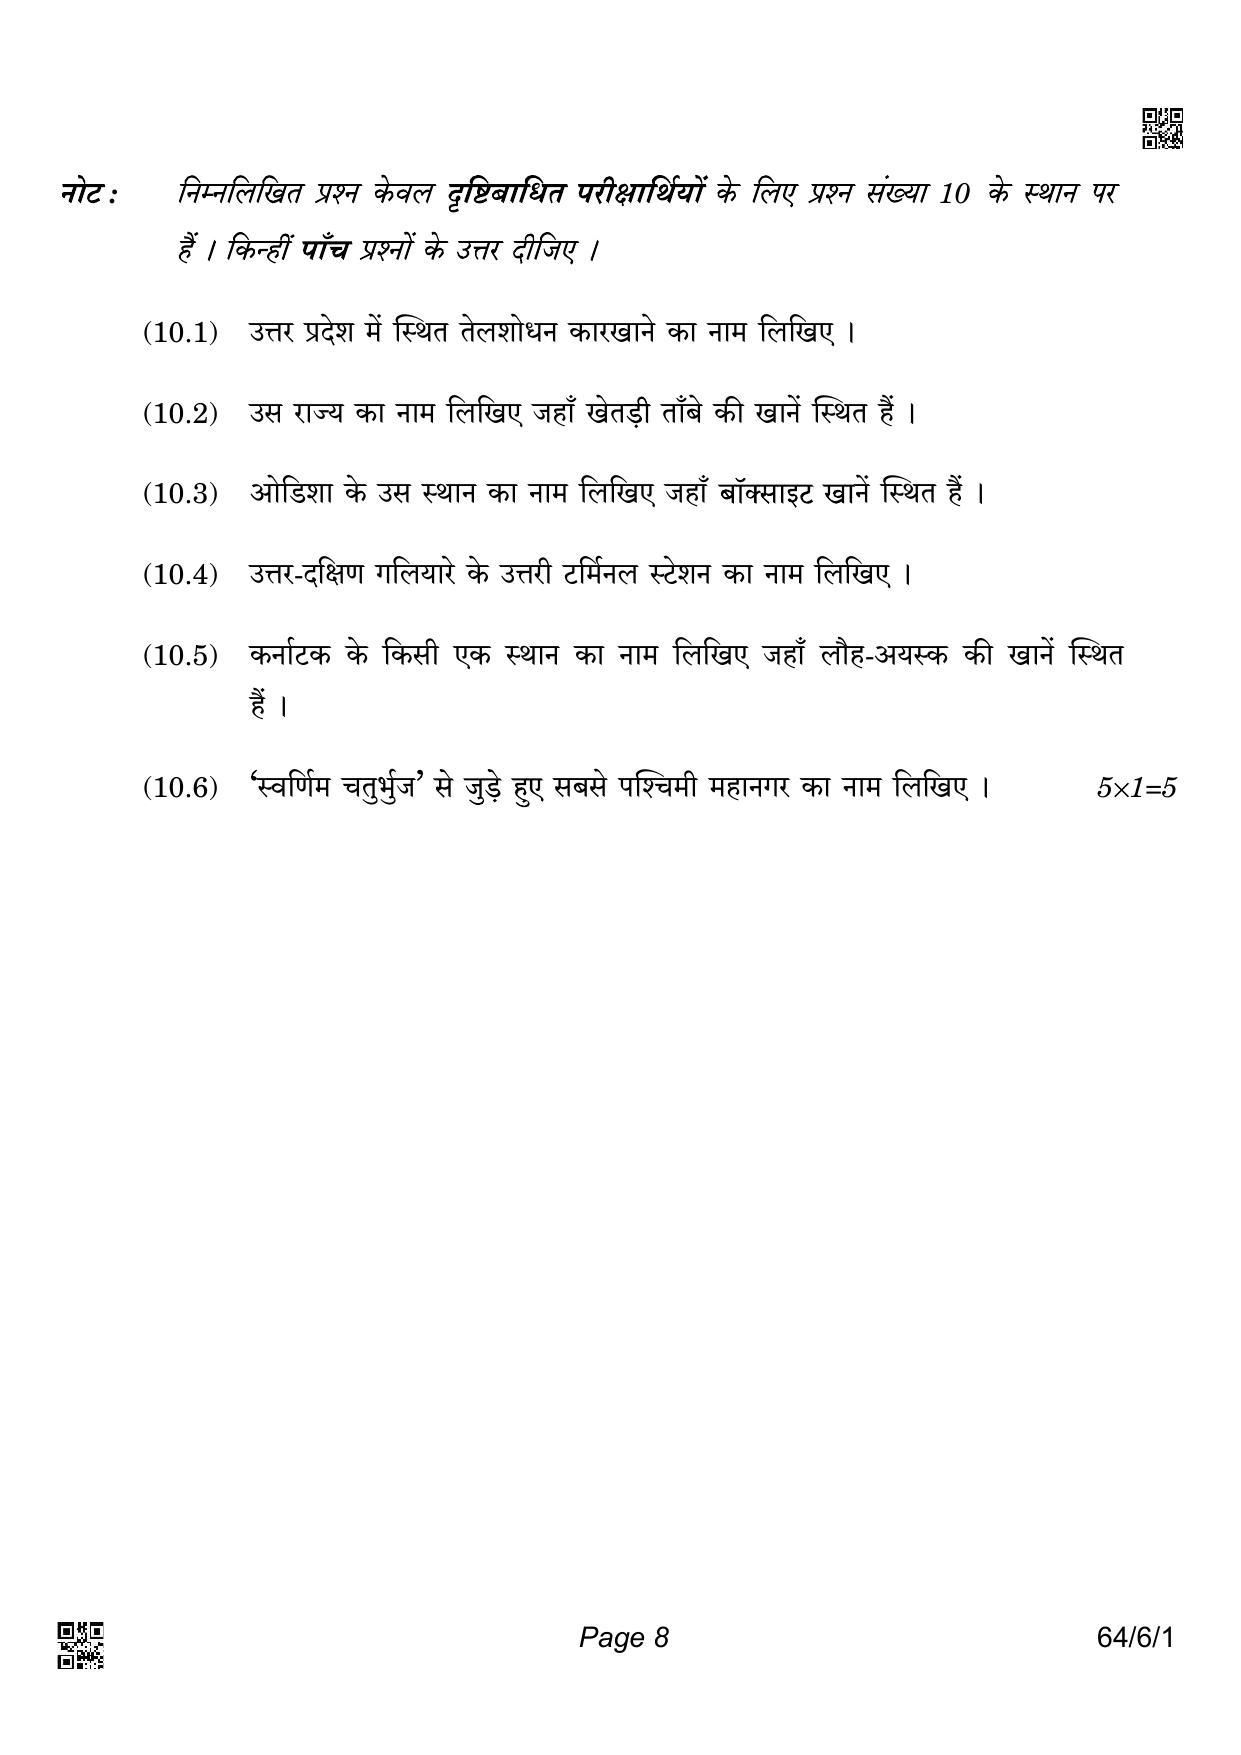 CBSE Class 12 64-6-1 GEOGRAPHY 2022 Compartment Question Paper - Page 8